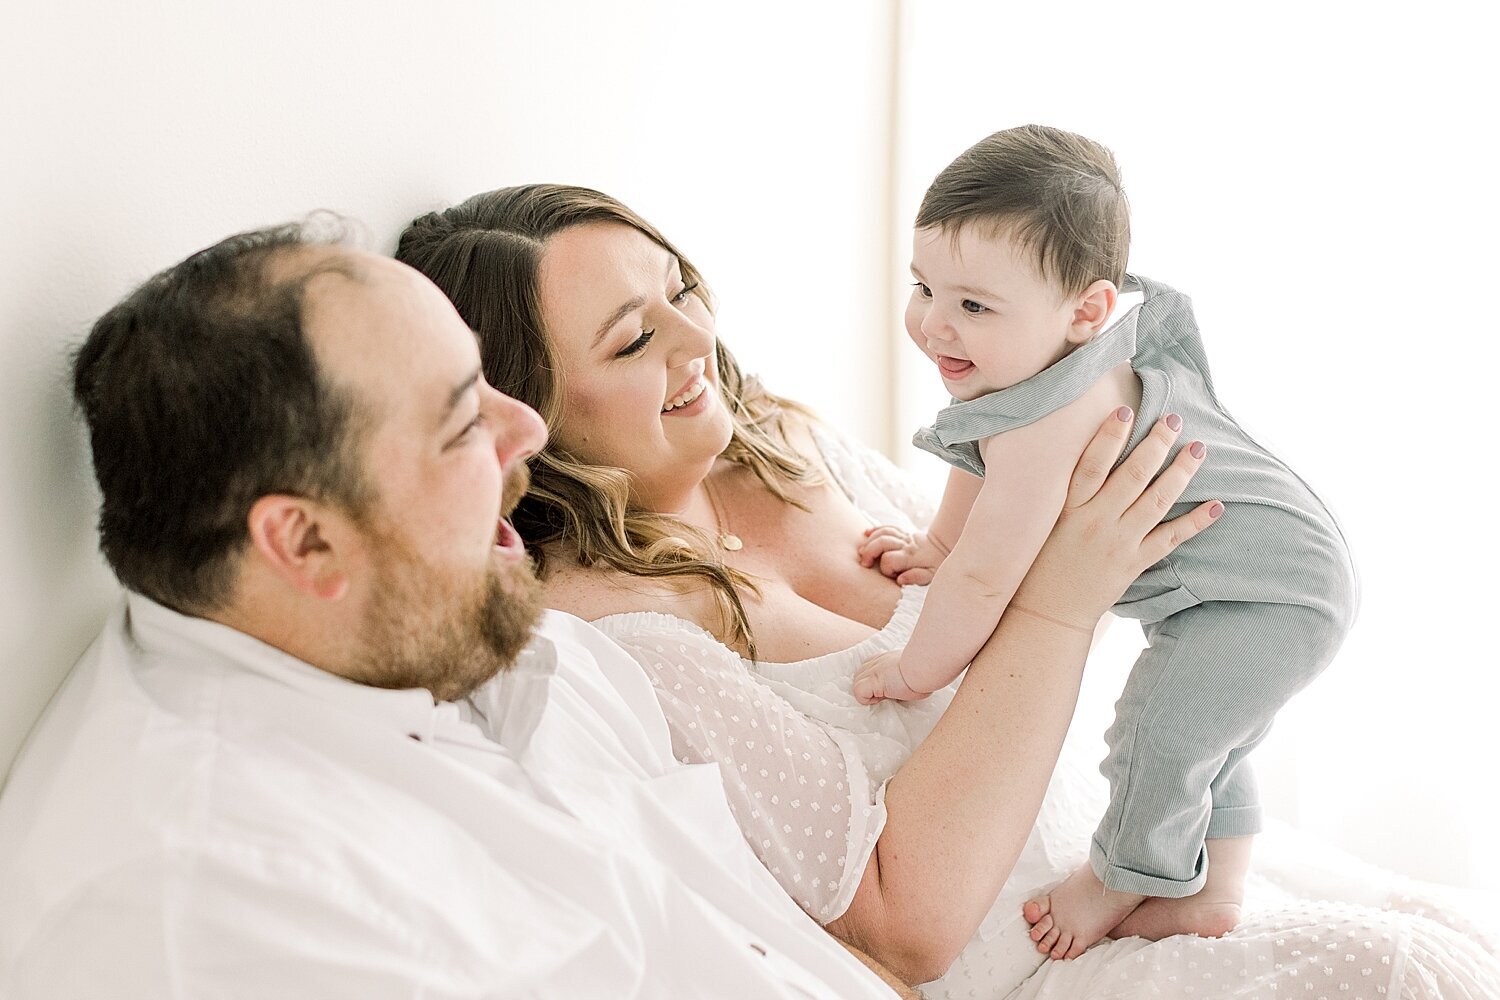 Mom and Dad interacting with their six month old son. Photo by Ambre Williams Photography.